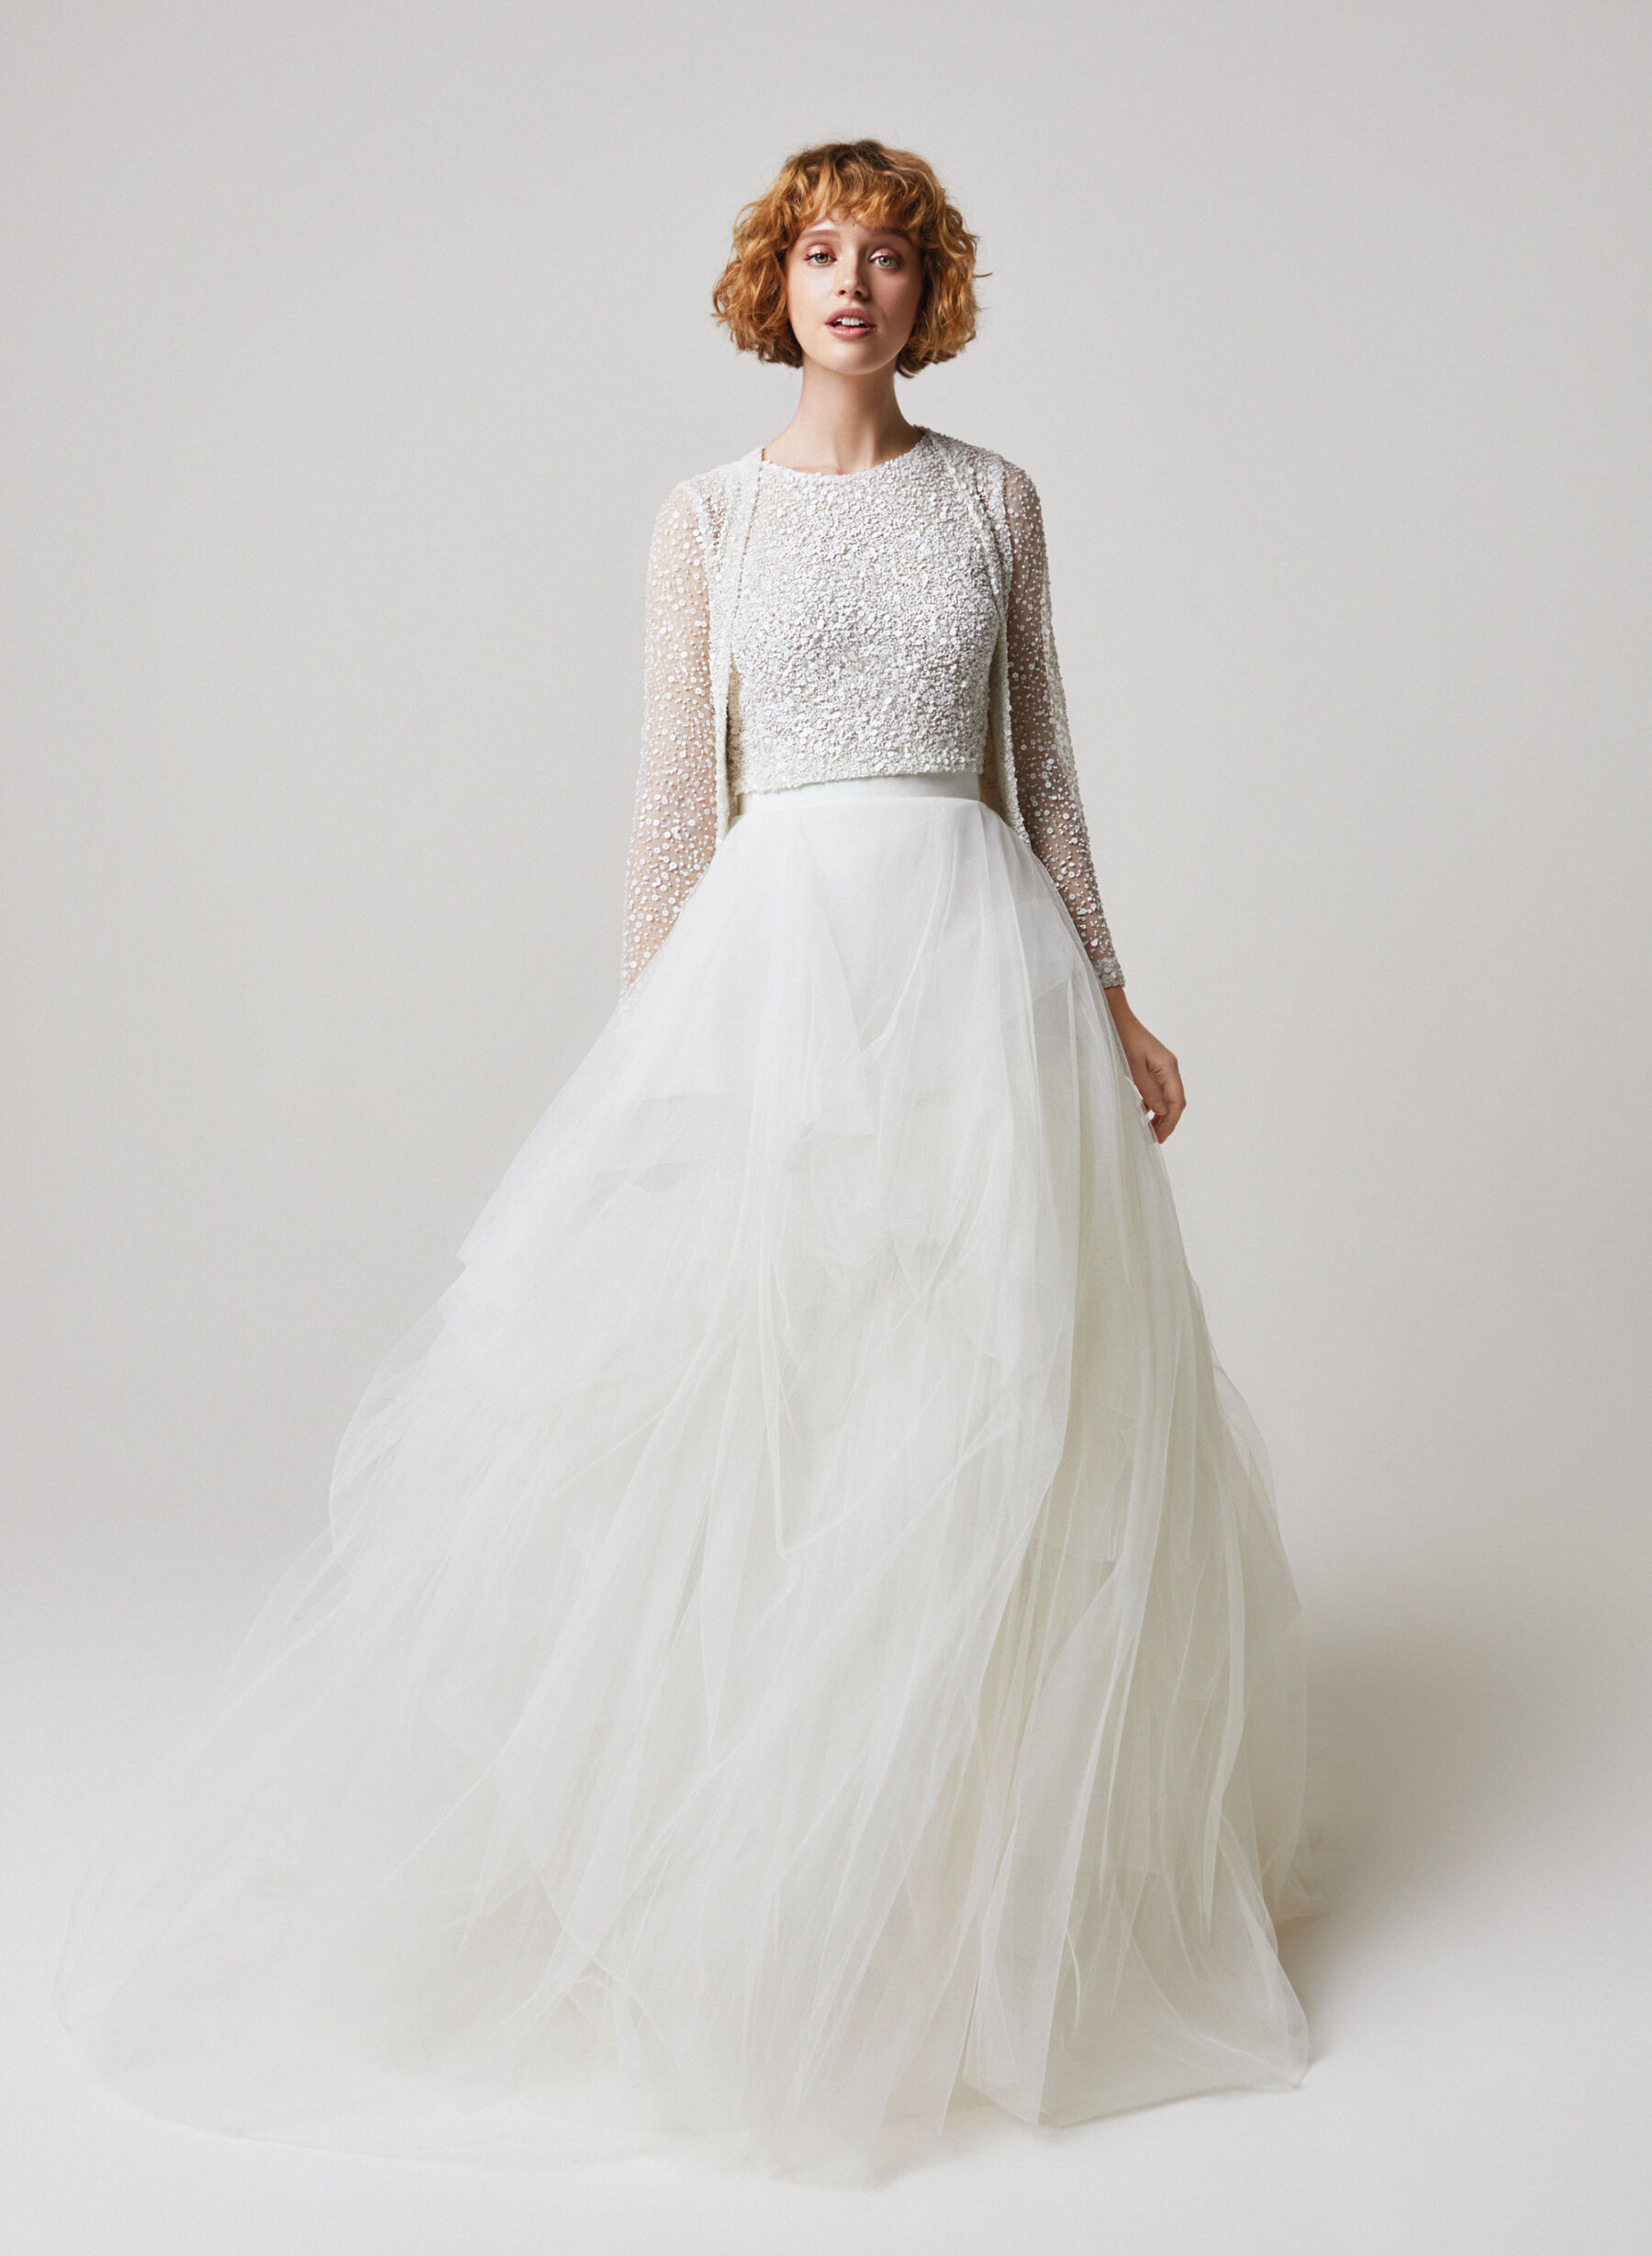 Jesus Peiro tulle wedding skirt and separate top. Available at the Miss Bush pop up sample sale, April 2023.